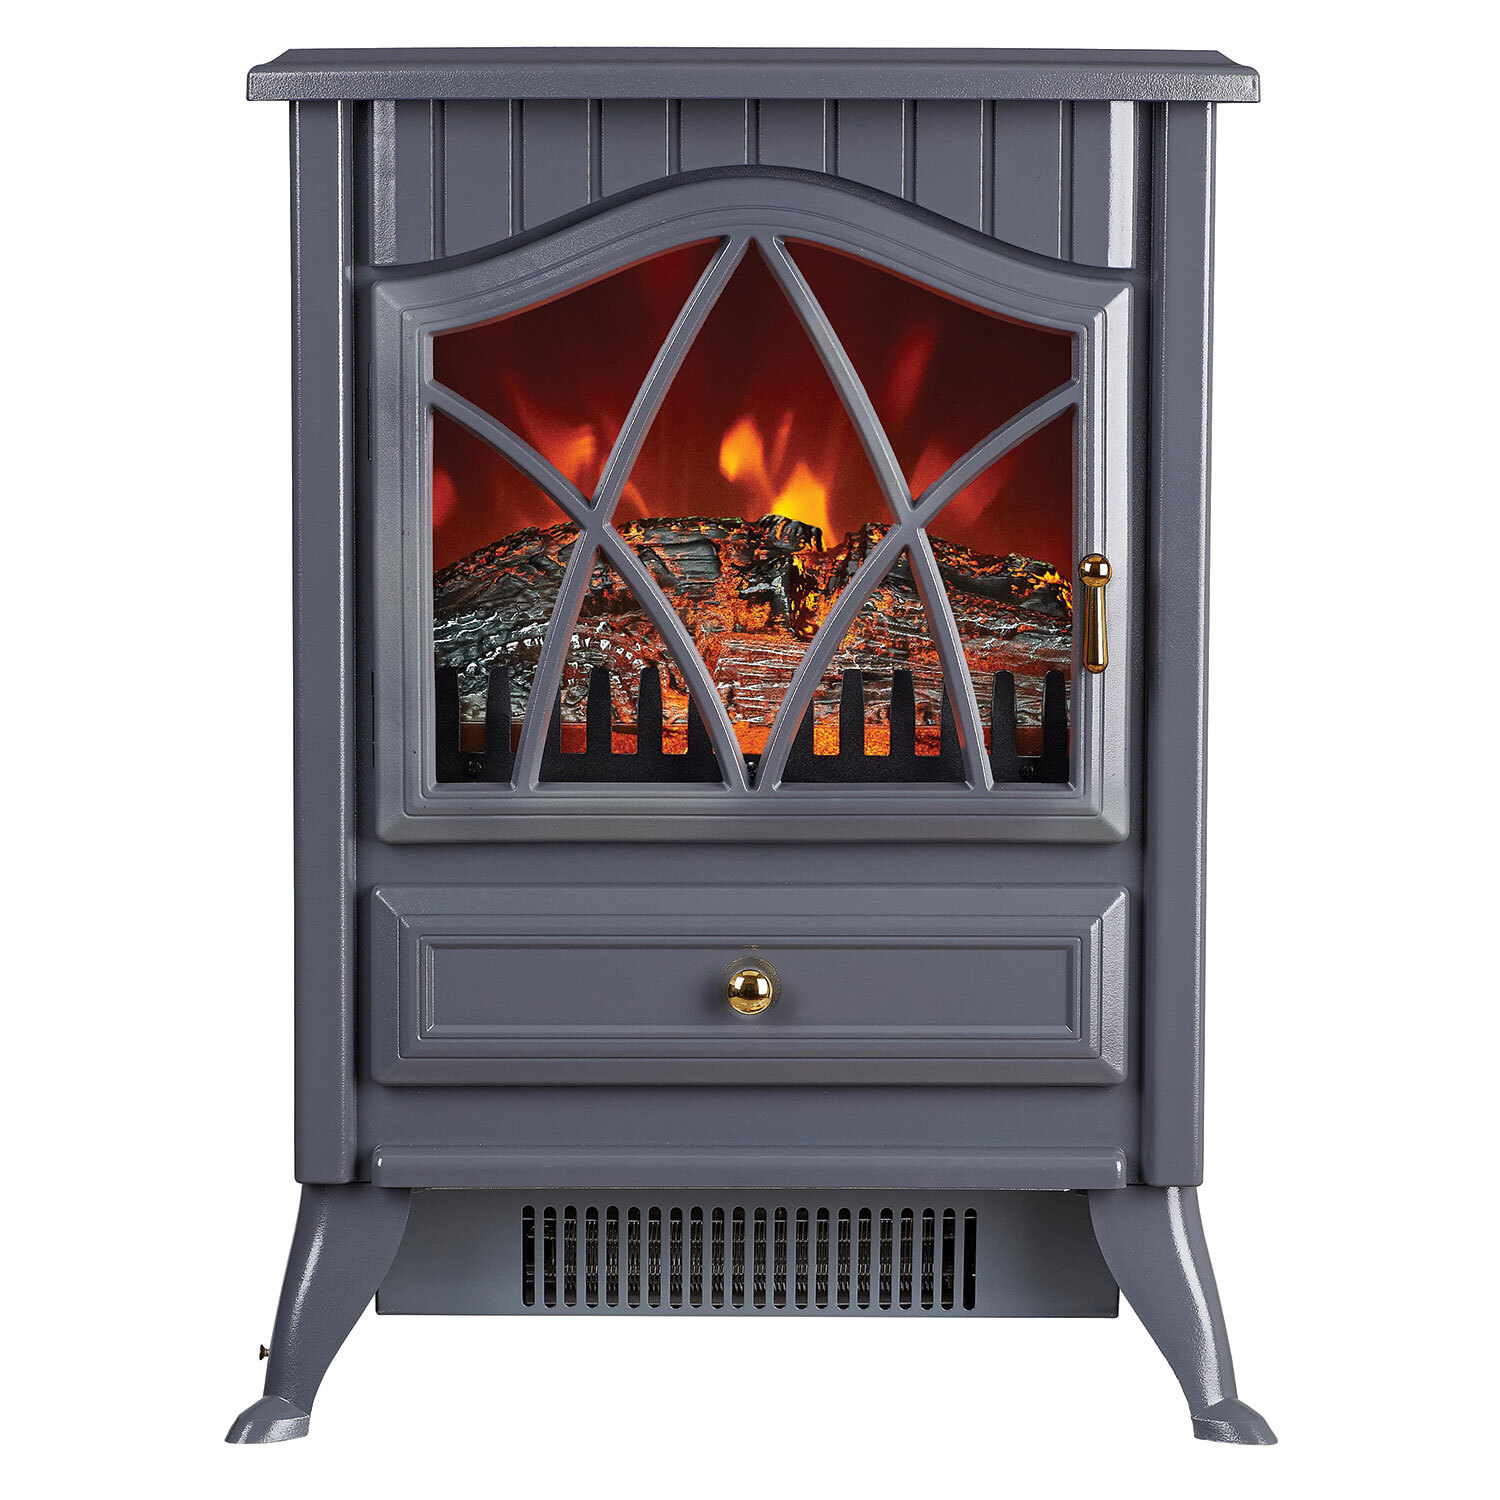 Grey Freestanding Log Effect Stove Fireplace Heaters Image 1